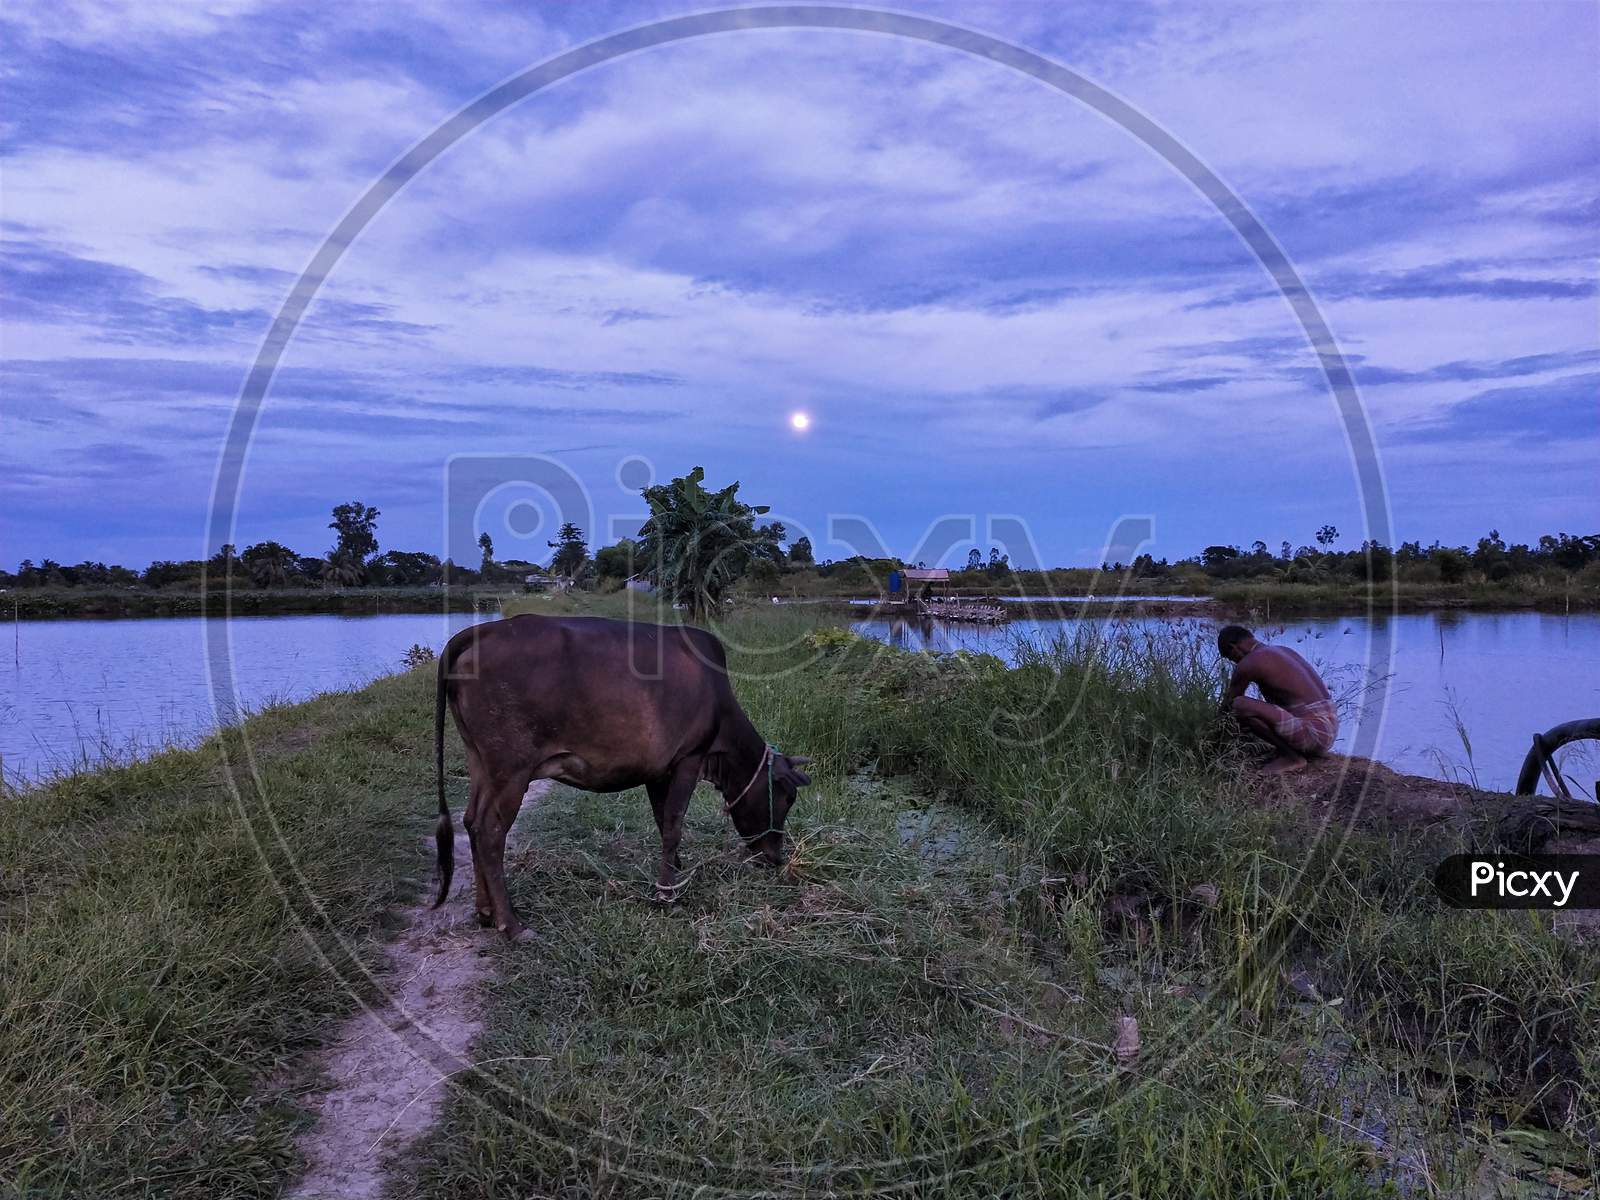 full moon evening in west bengal, cow eating grass, a farmer is cutting grass